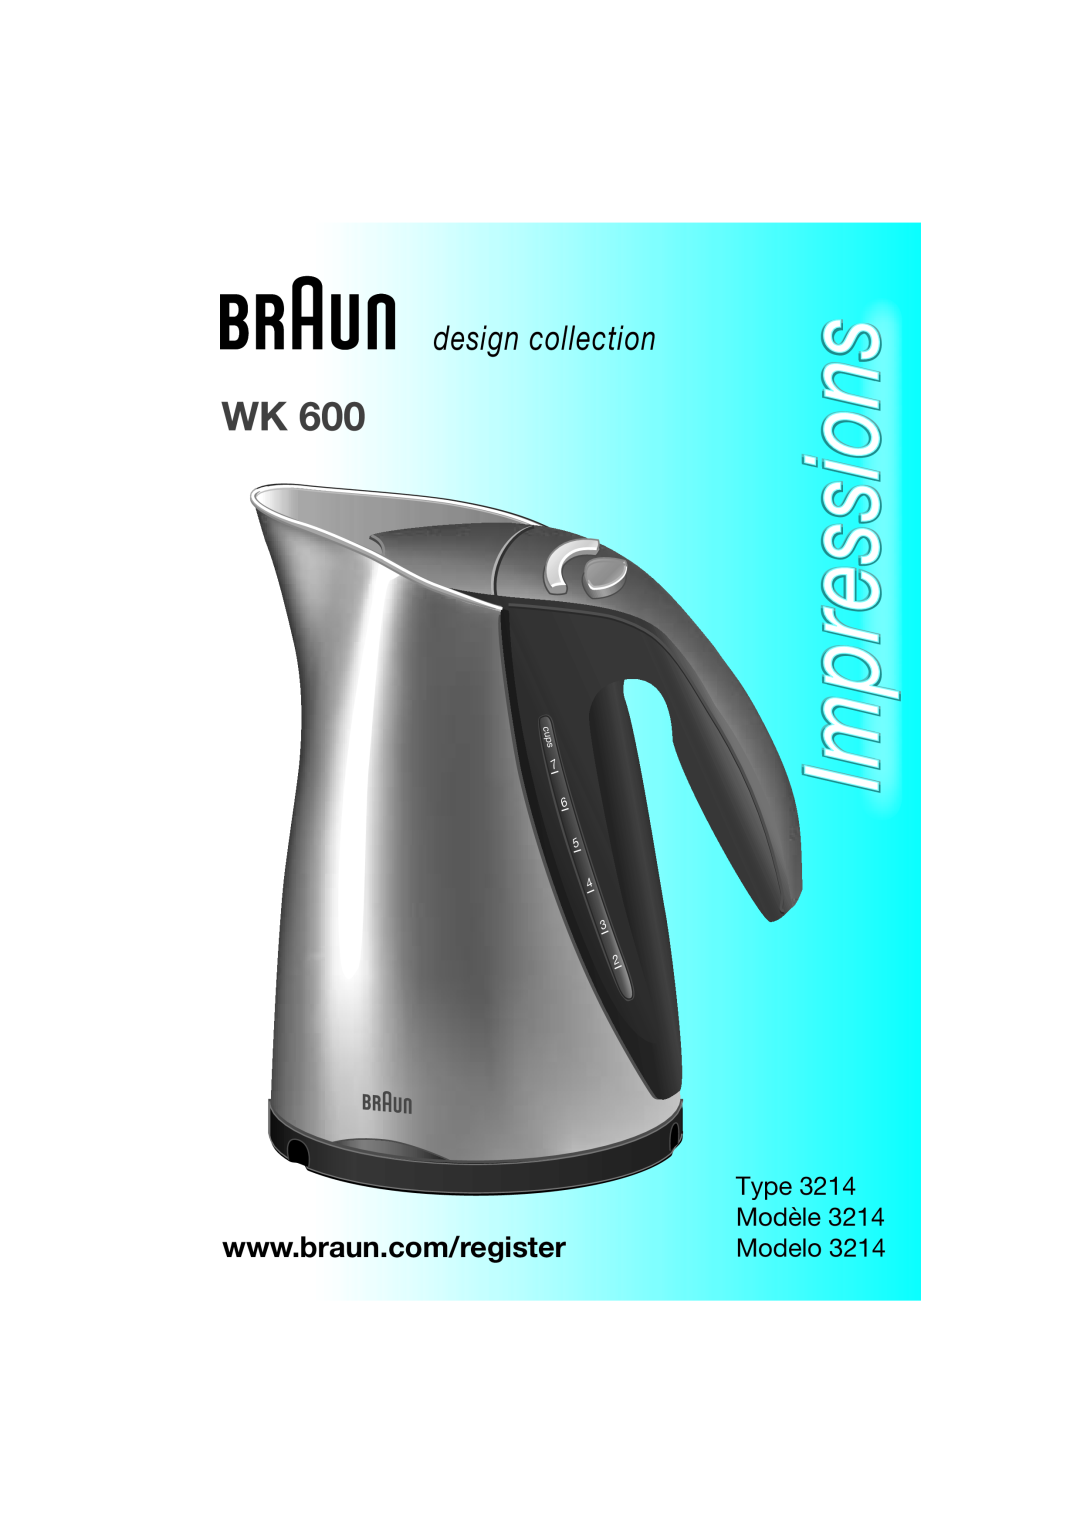 Braun WK 600 manual Impressions, design collection, Type, Modèle, Modelo, 6 5, cups 